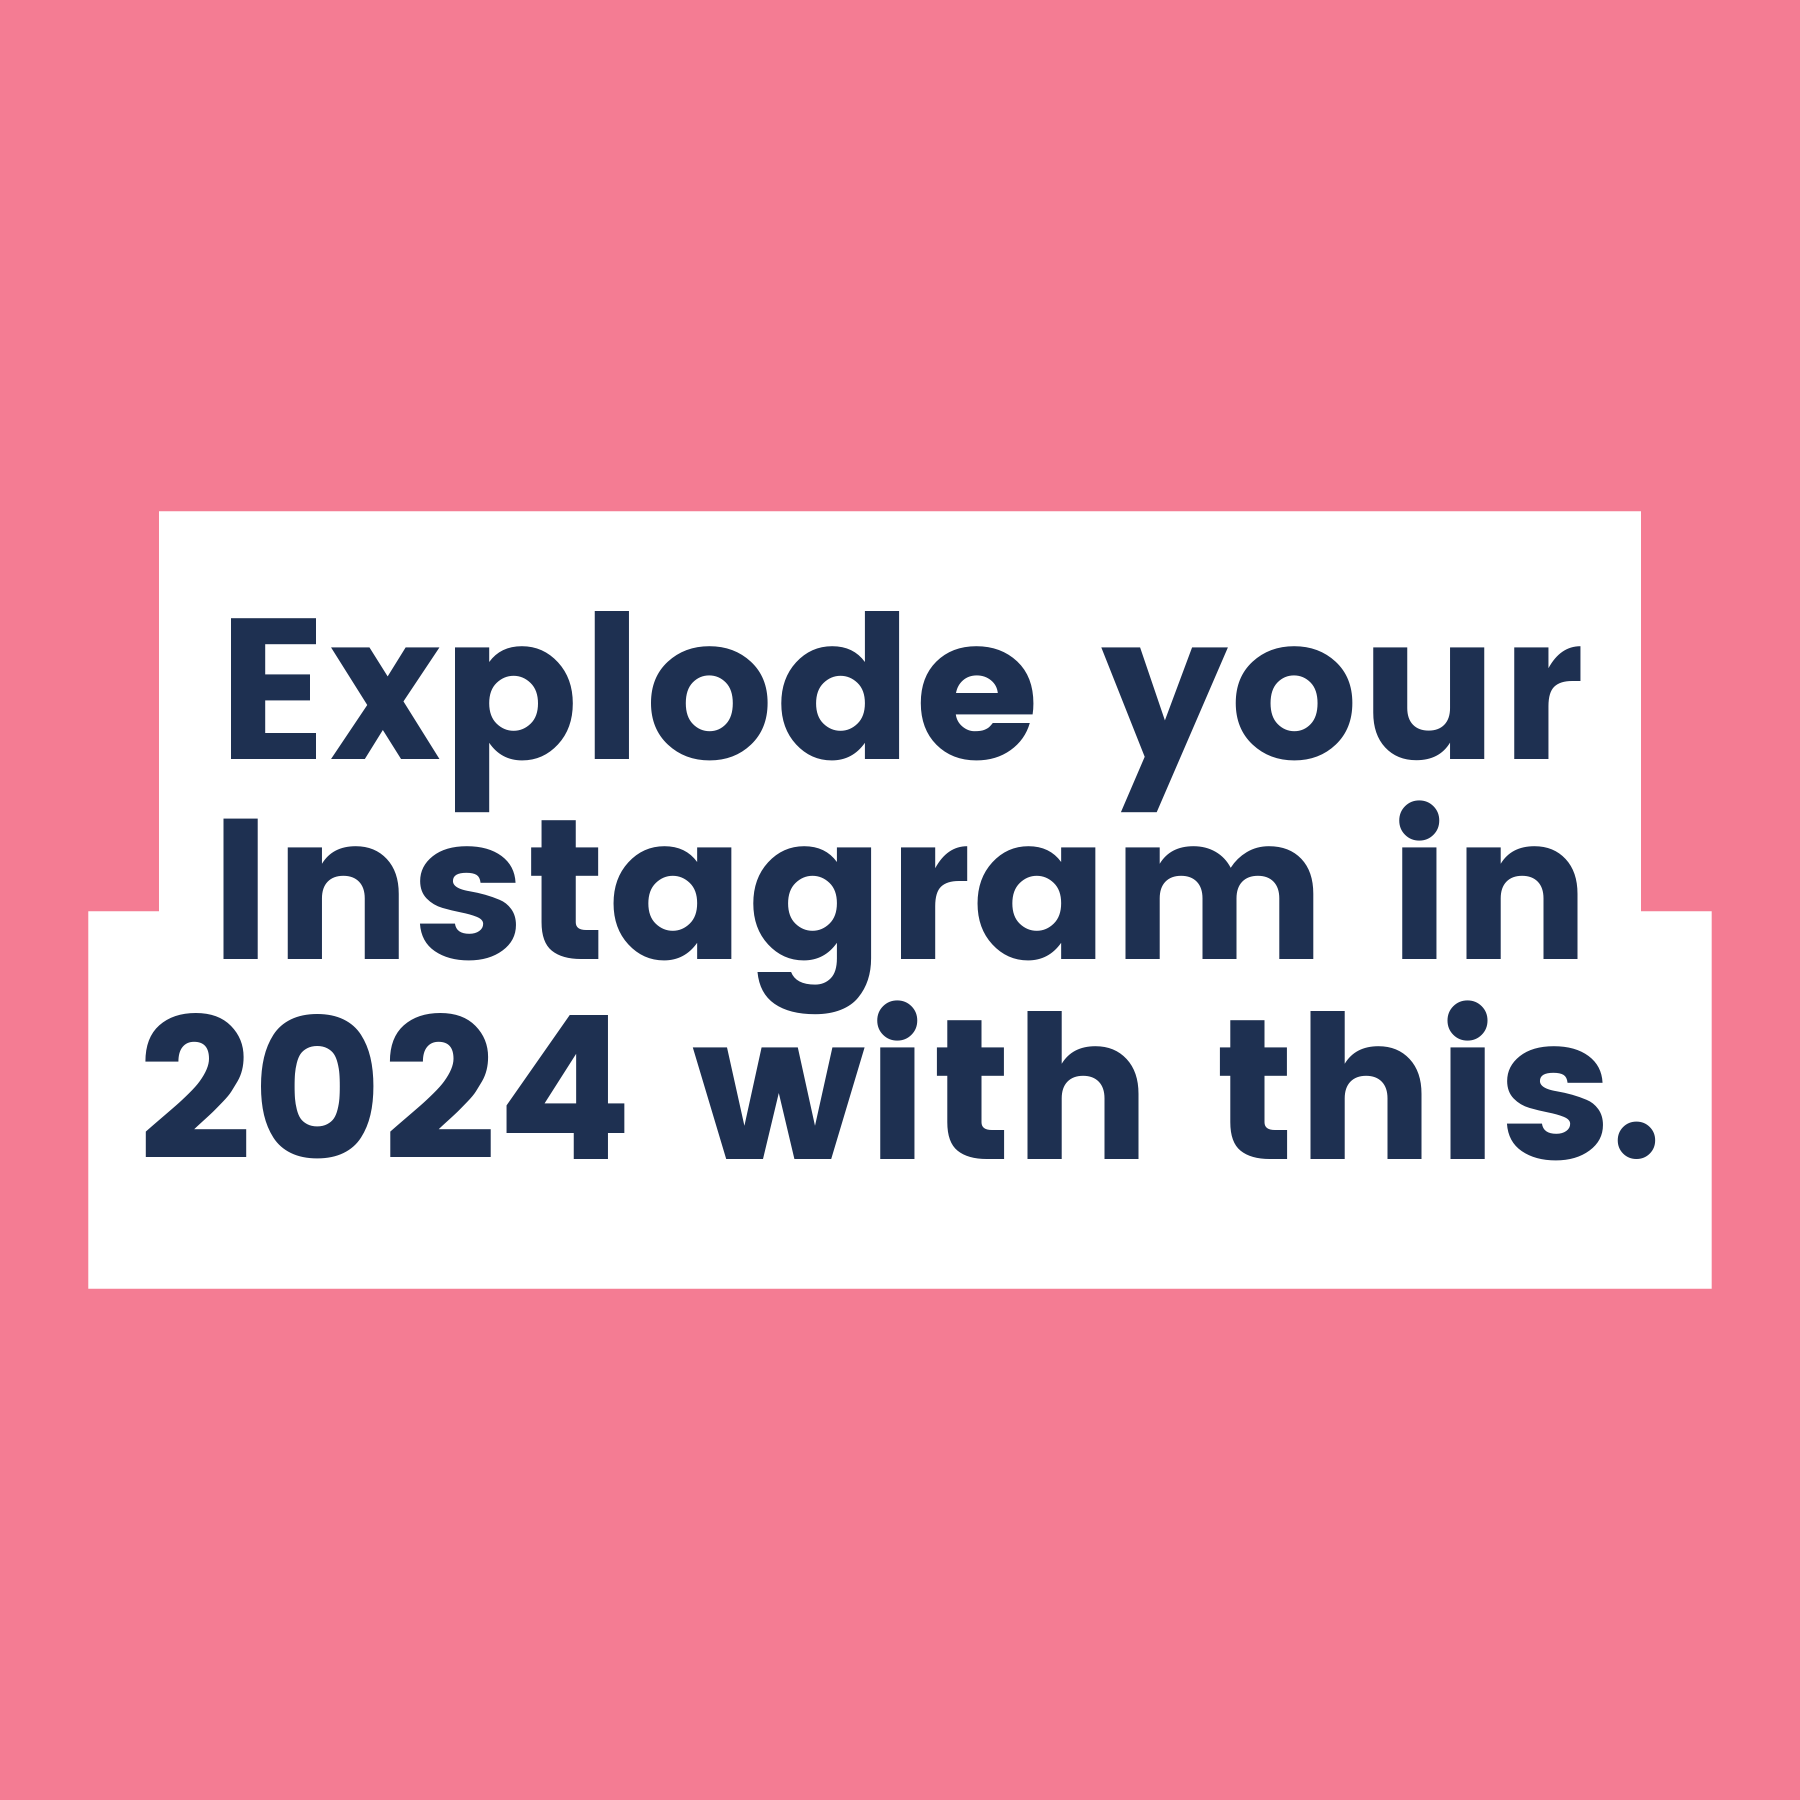 Want to spend less time working and more time playing in 2024? Here's how. The Fashion Advocate Instagram growth strategy